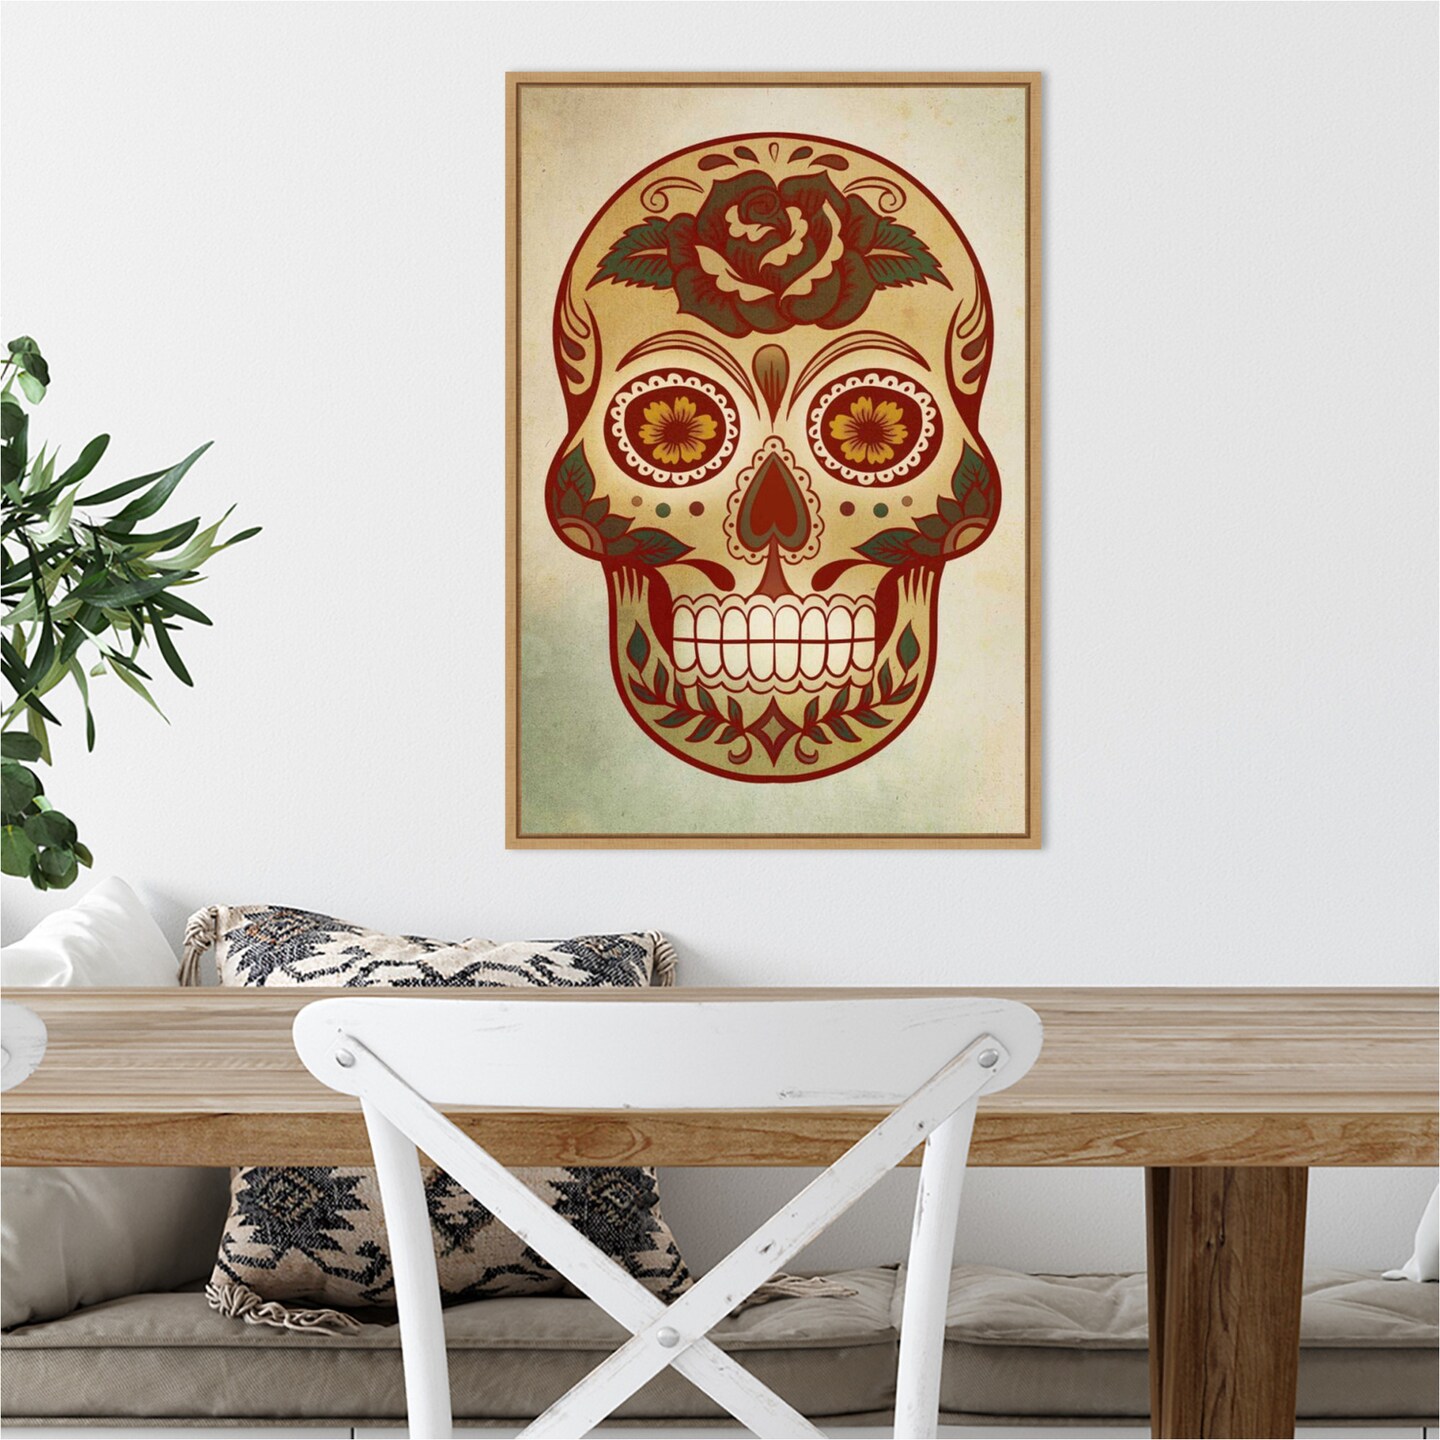 Day of the Dead Skull I by PI Gallerie 16-in. W x 23-in. H. Canvas Wall Art Print Framed in Natural